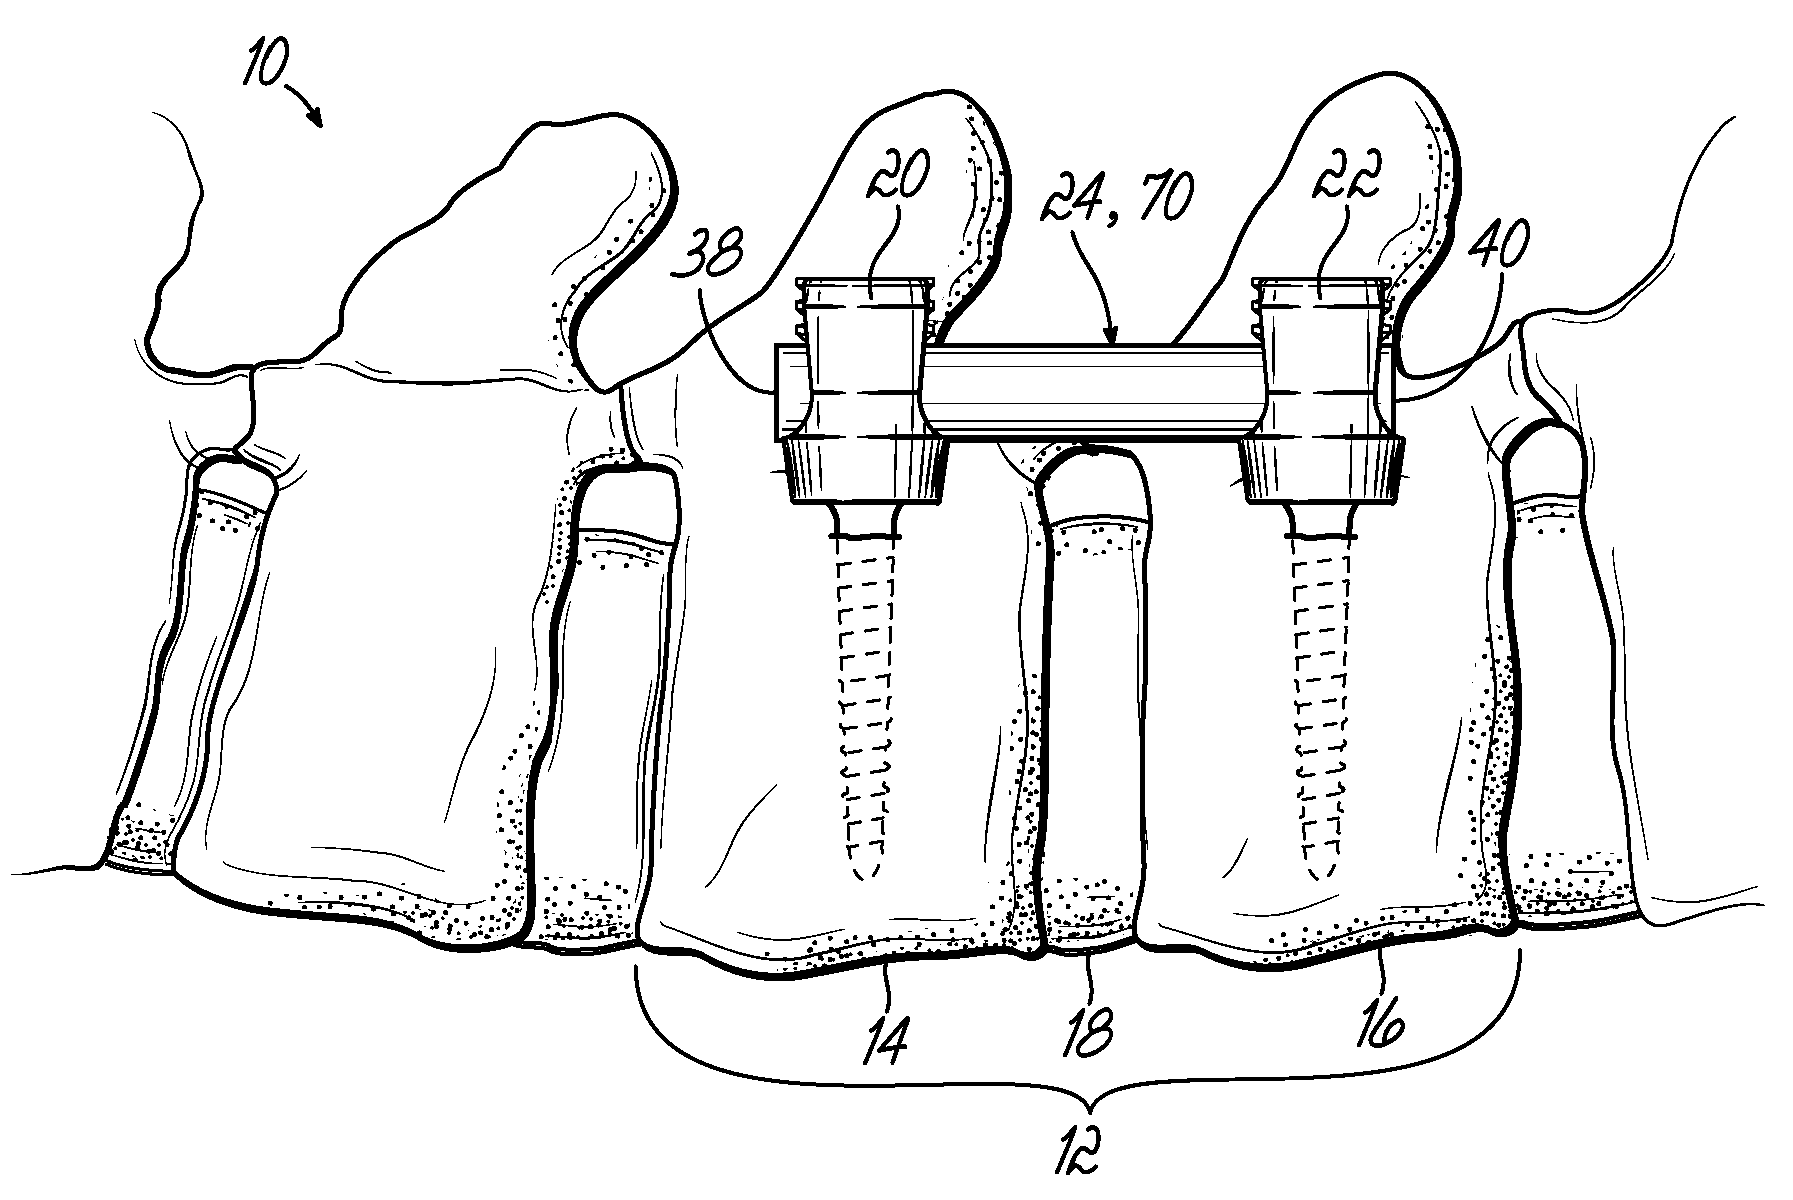 Flexible member for use in a spinal column and method for making